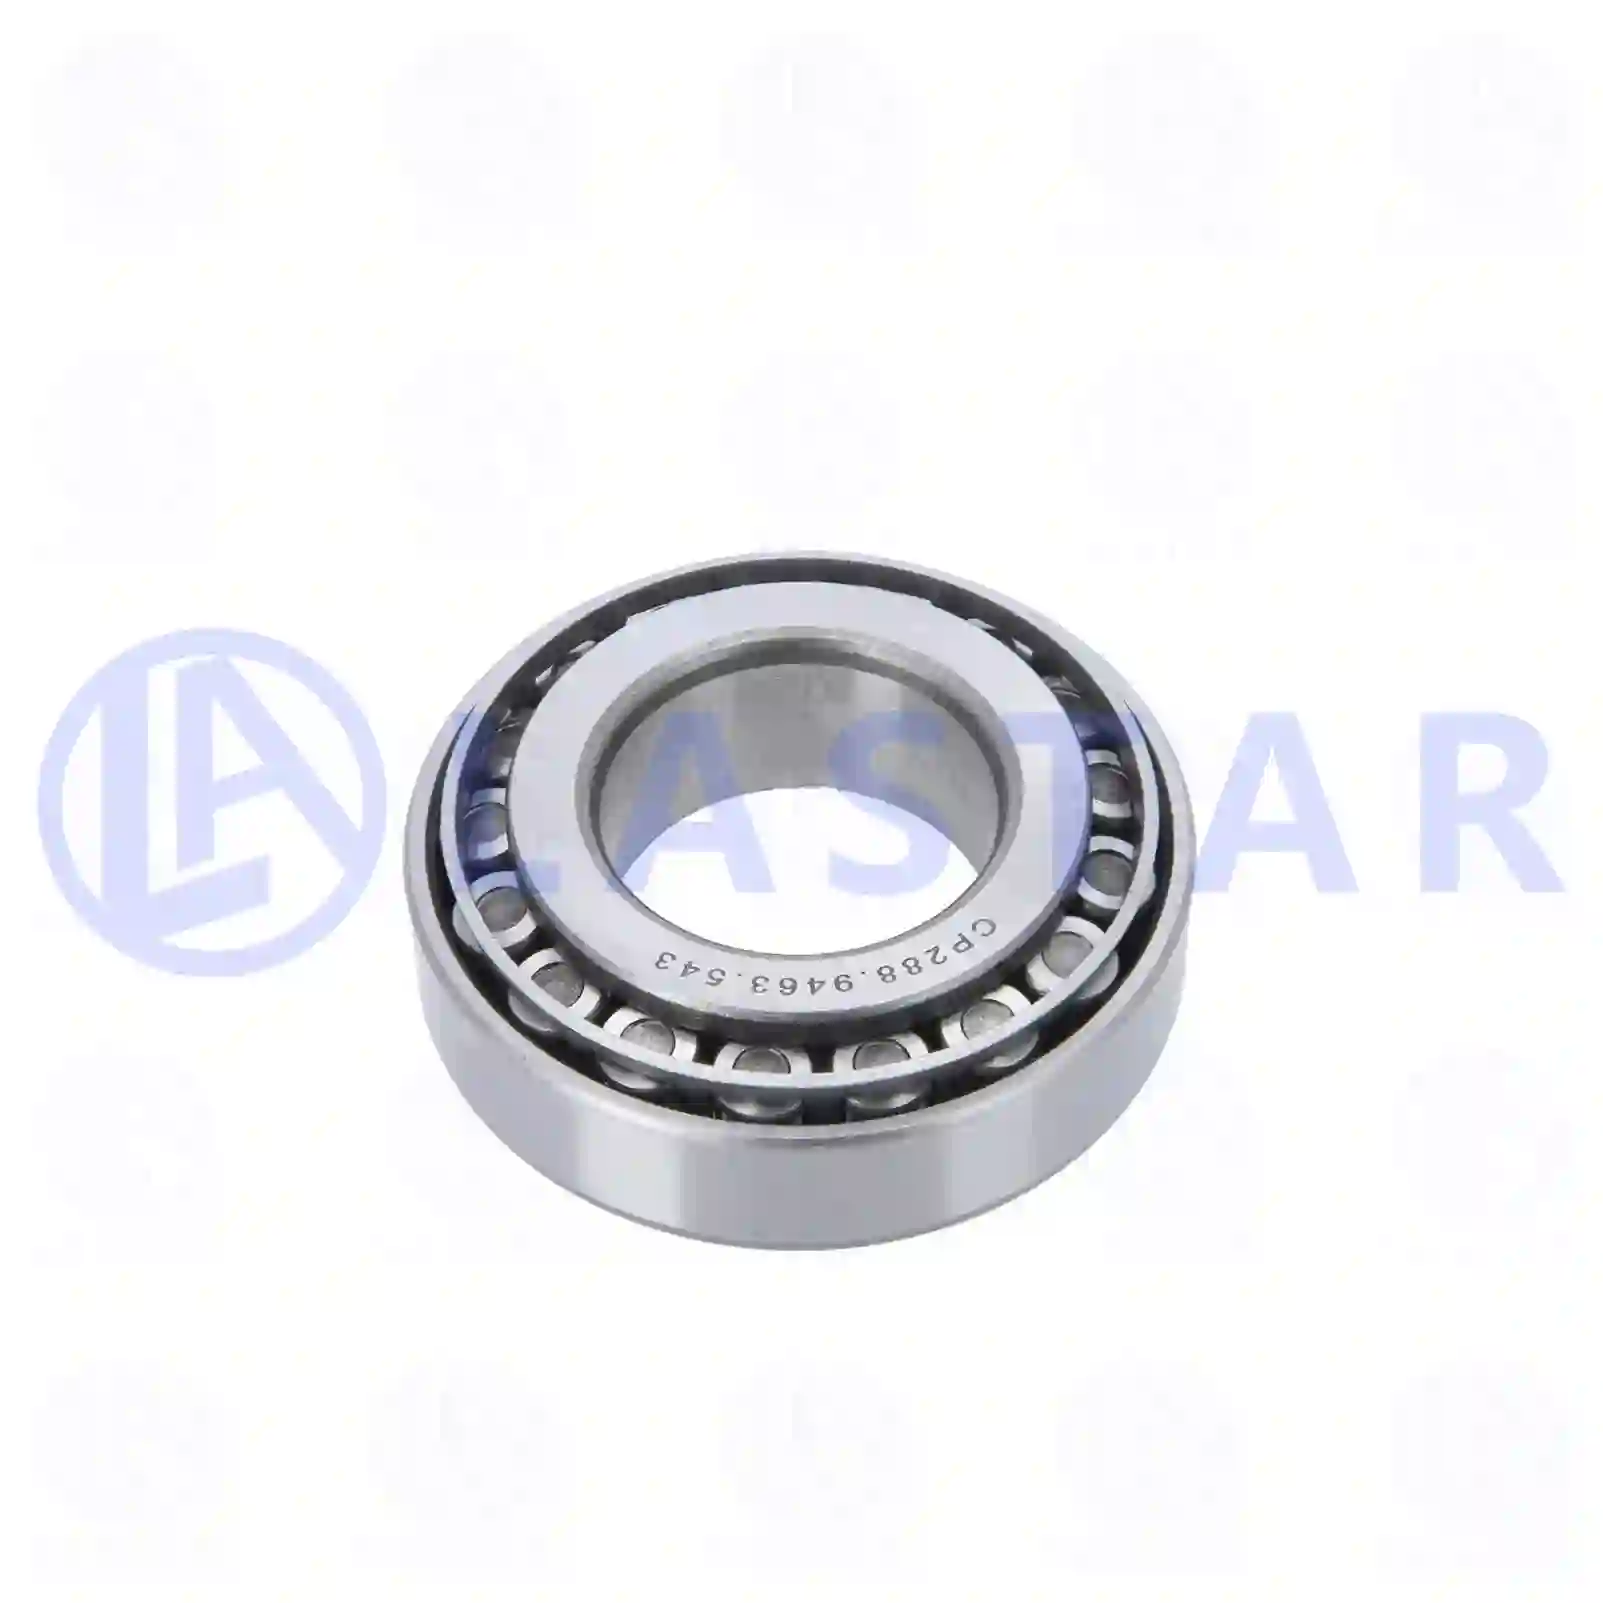 Bearings Tapered roller bearing, la no: 77725069 ,  oem no:0014554, 14554, 0001440642X1, 004207725000, 005090157, 1440642X1, 4207725, TK4207725000, 01110002, 26800140, 10500474, 710500474, 8-94248078-0, 01110002, 07164502, 08560451, 08850841, 26800140, 3612944000, 503644293, 60144280, 93804619, 93806251, 823632208, 06324890080, 06324990062, 06324990063, 81934200055, 81934200246, 0039813805, 0039819405, 0159813405, 0159813805, 0159815605, 0169813505, 0169817205, MB025005, 40210-76000, 40210-9X60A, 0023432208, 0773220800, 0959232208, 5516014042, 5516014518, 5516014554, 214104, 183763, 7011093 Lastar Spare Part | Truck Spare Parts, Auotomotive Spare Parts